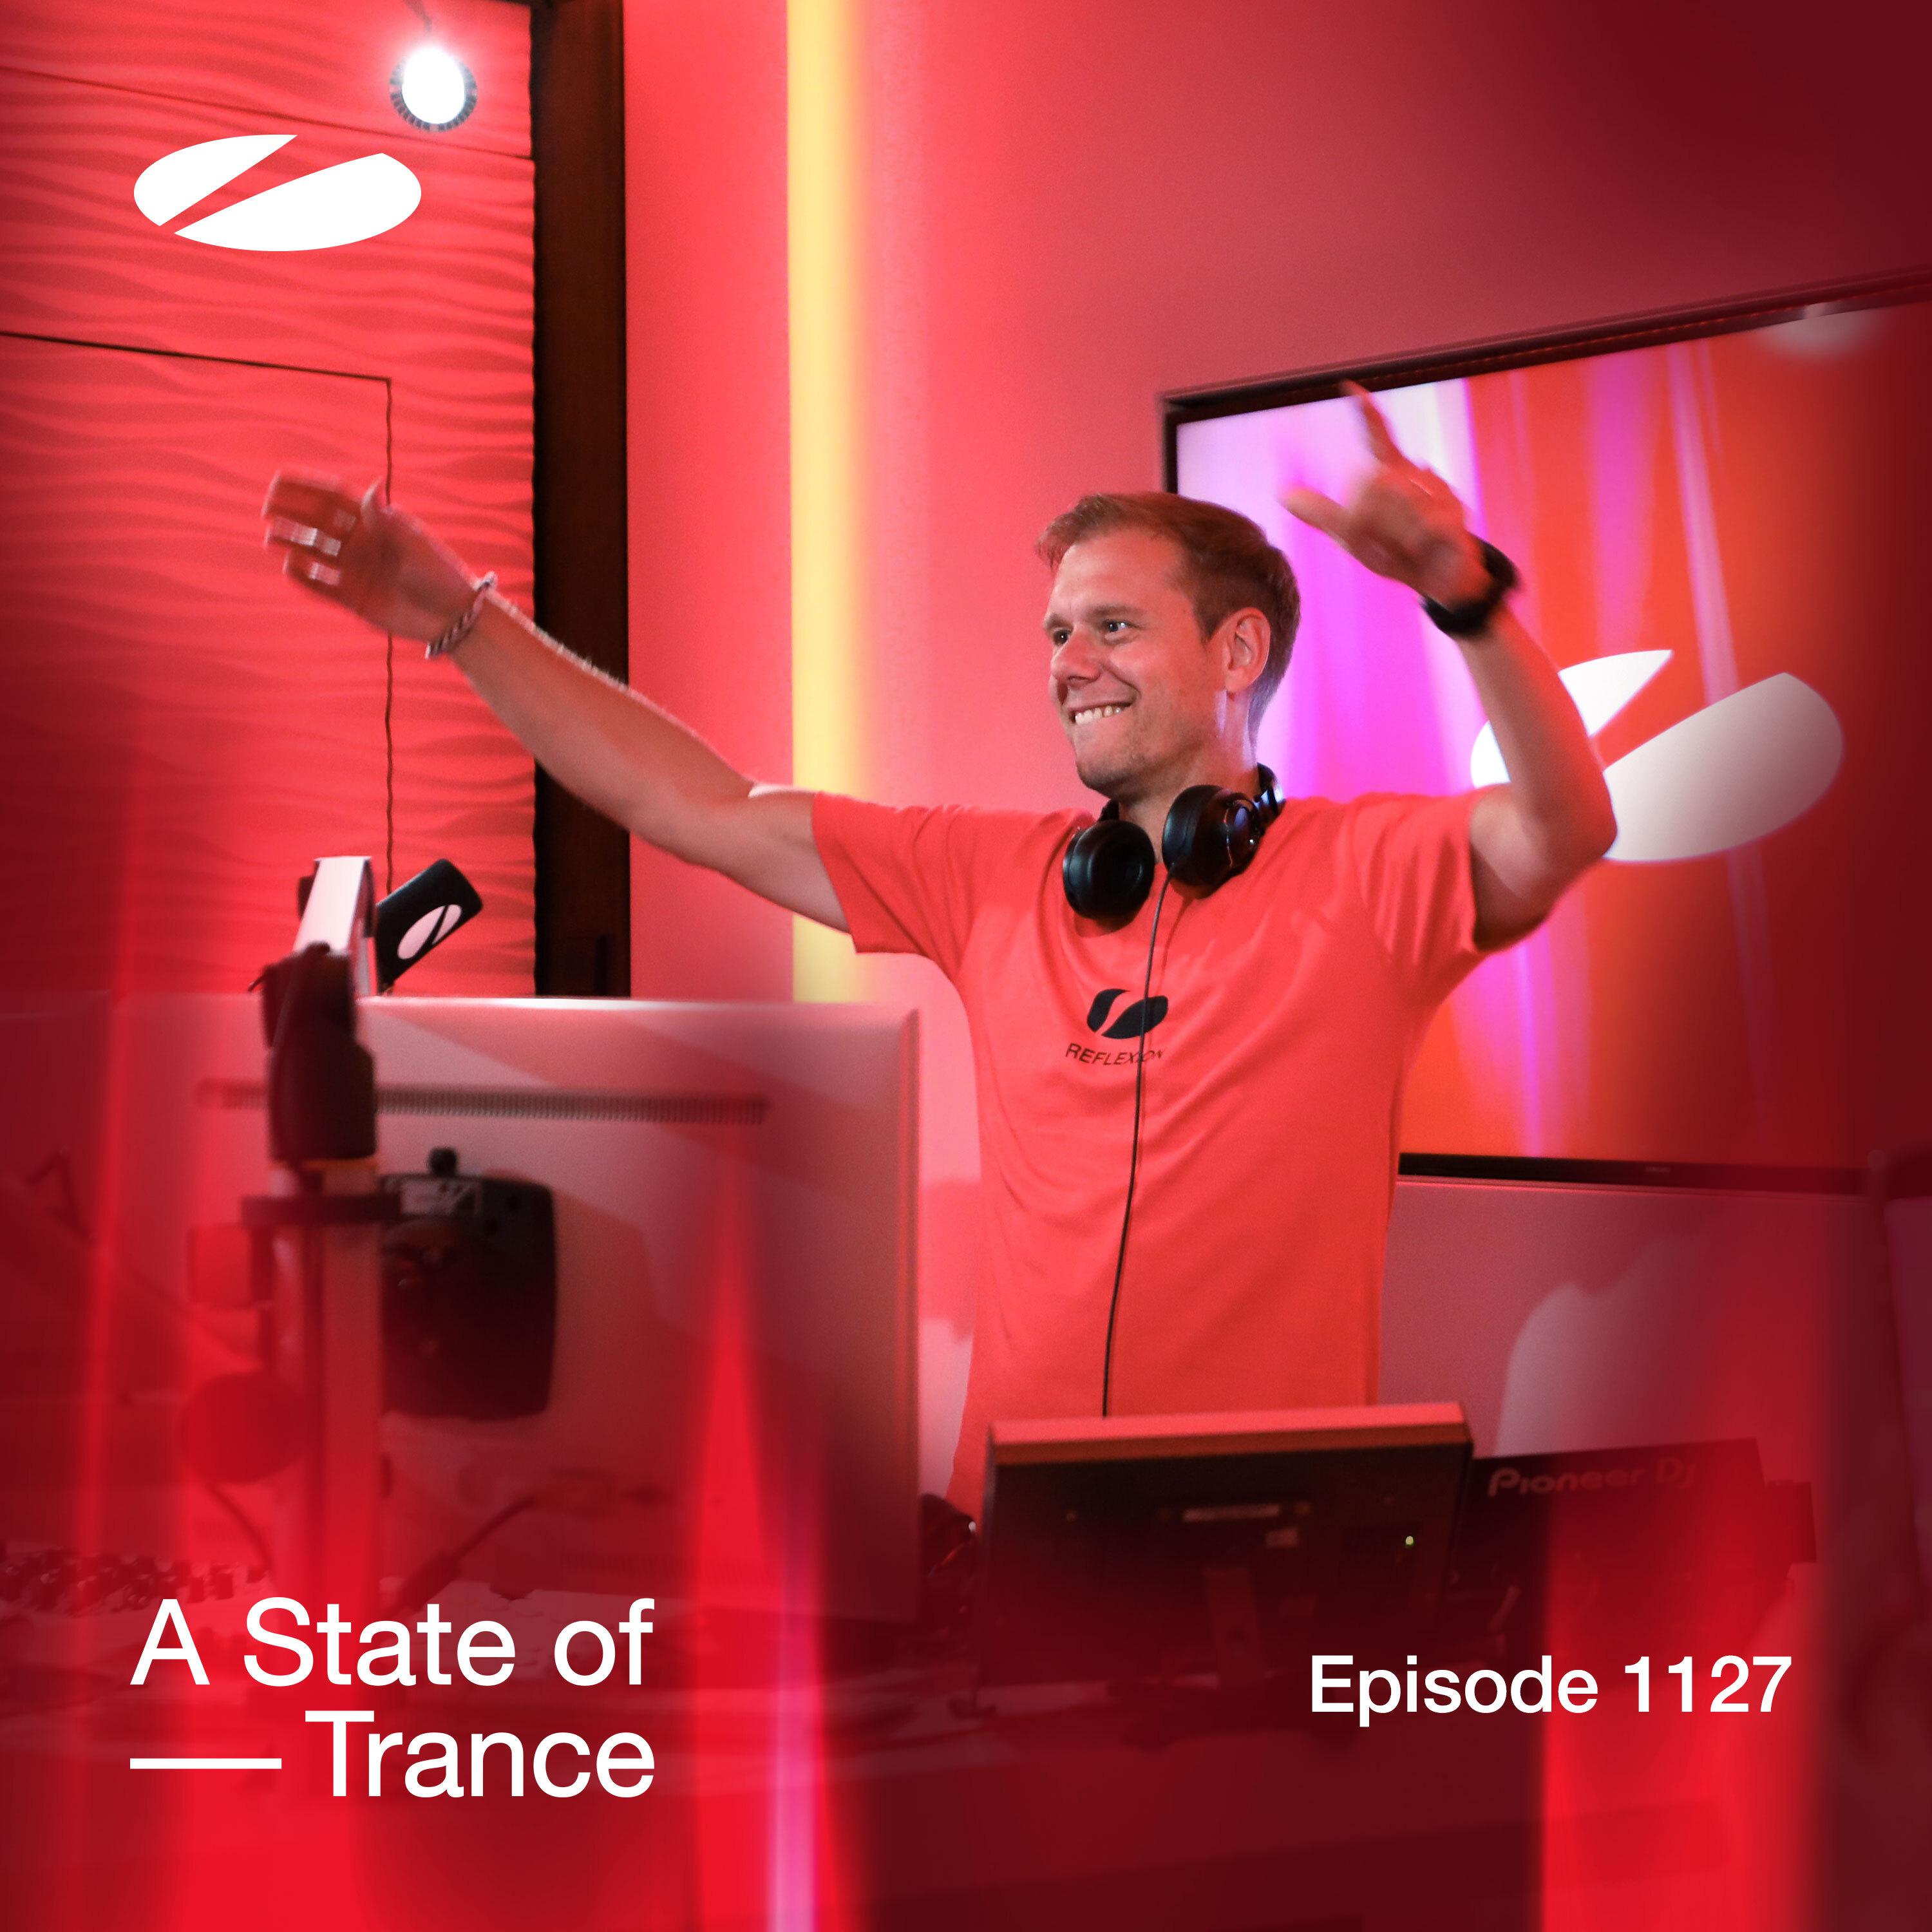 Armin van Buuren - A State of Trance (ASOT 1127) (This Week's Service For Dreamers, Pt. 3)